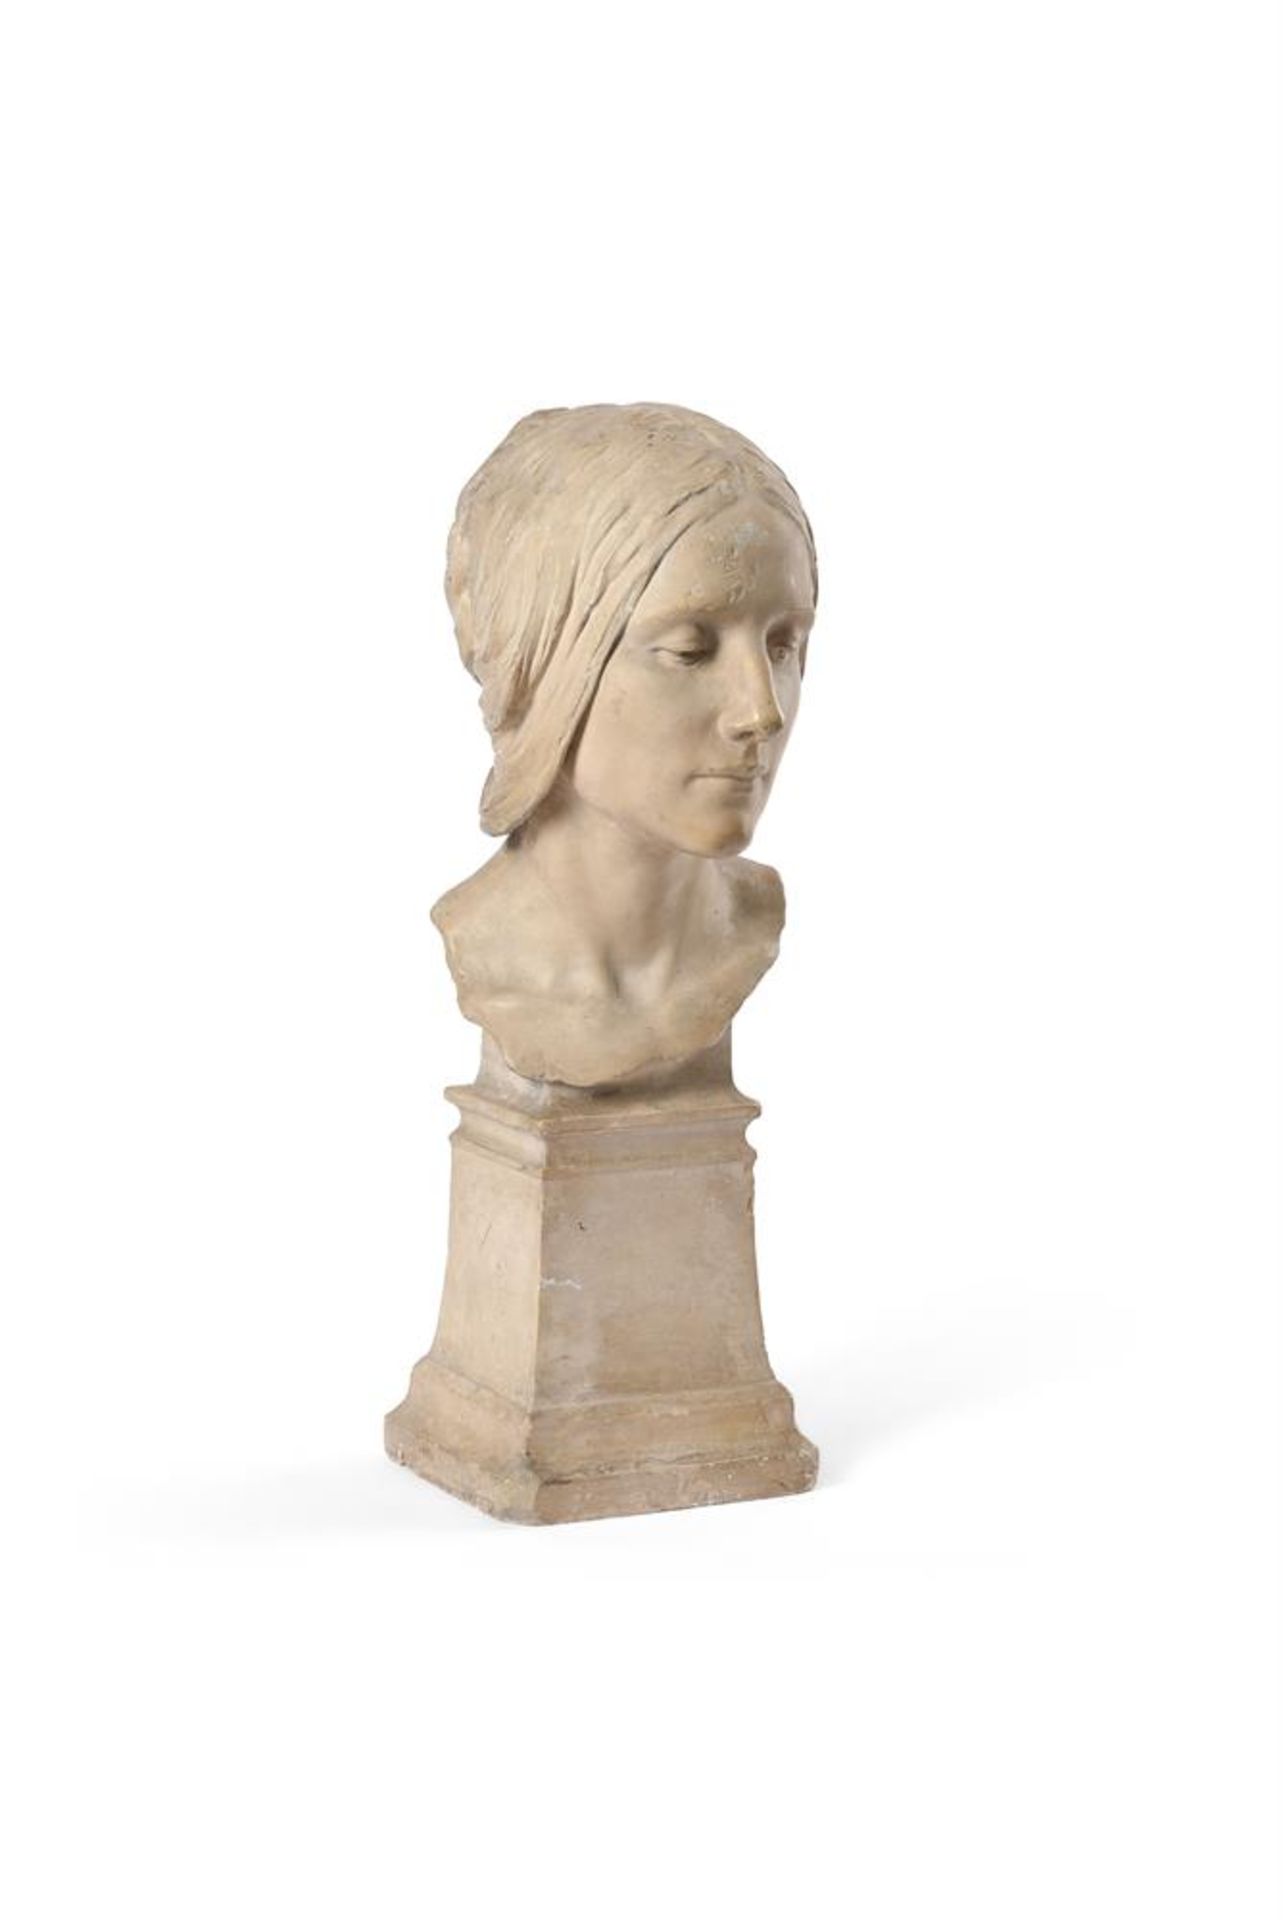 AFTER FREDERICK JAMES HALNON (BRITISH, 1881-1958), A PLASTER BUST, EARLY 20TH CENTURY - Image 2 of 5